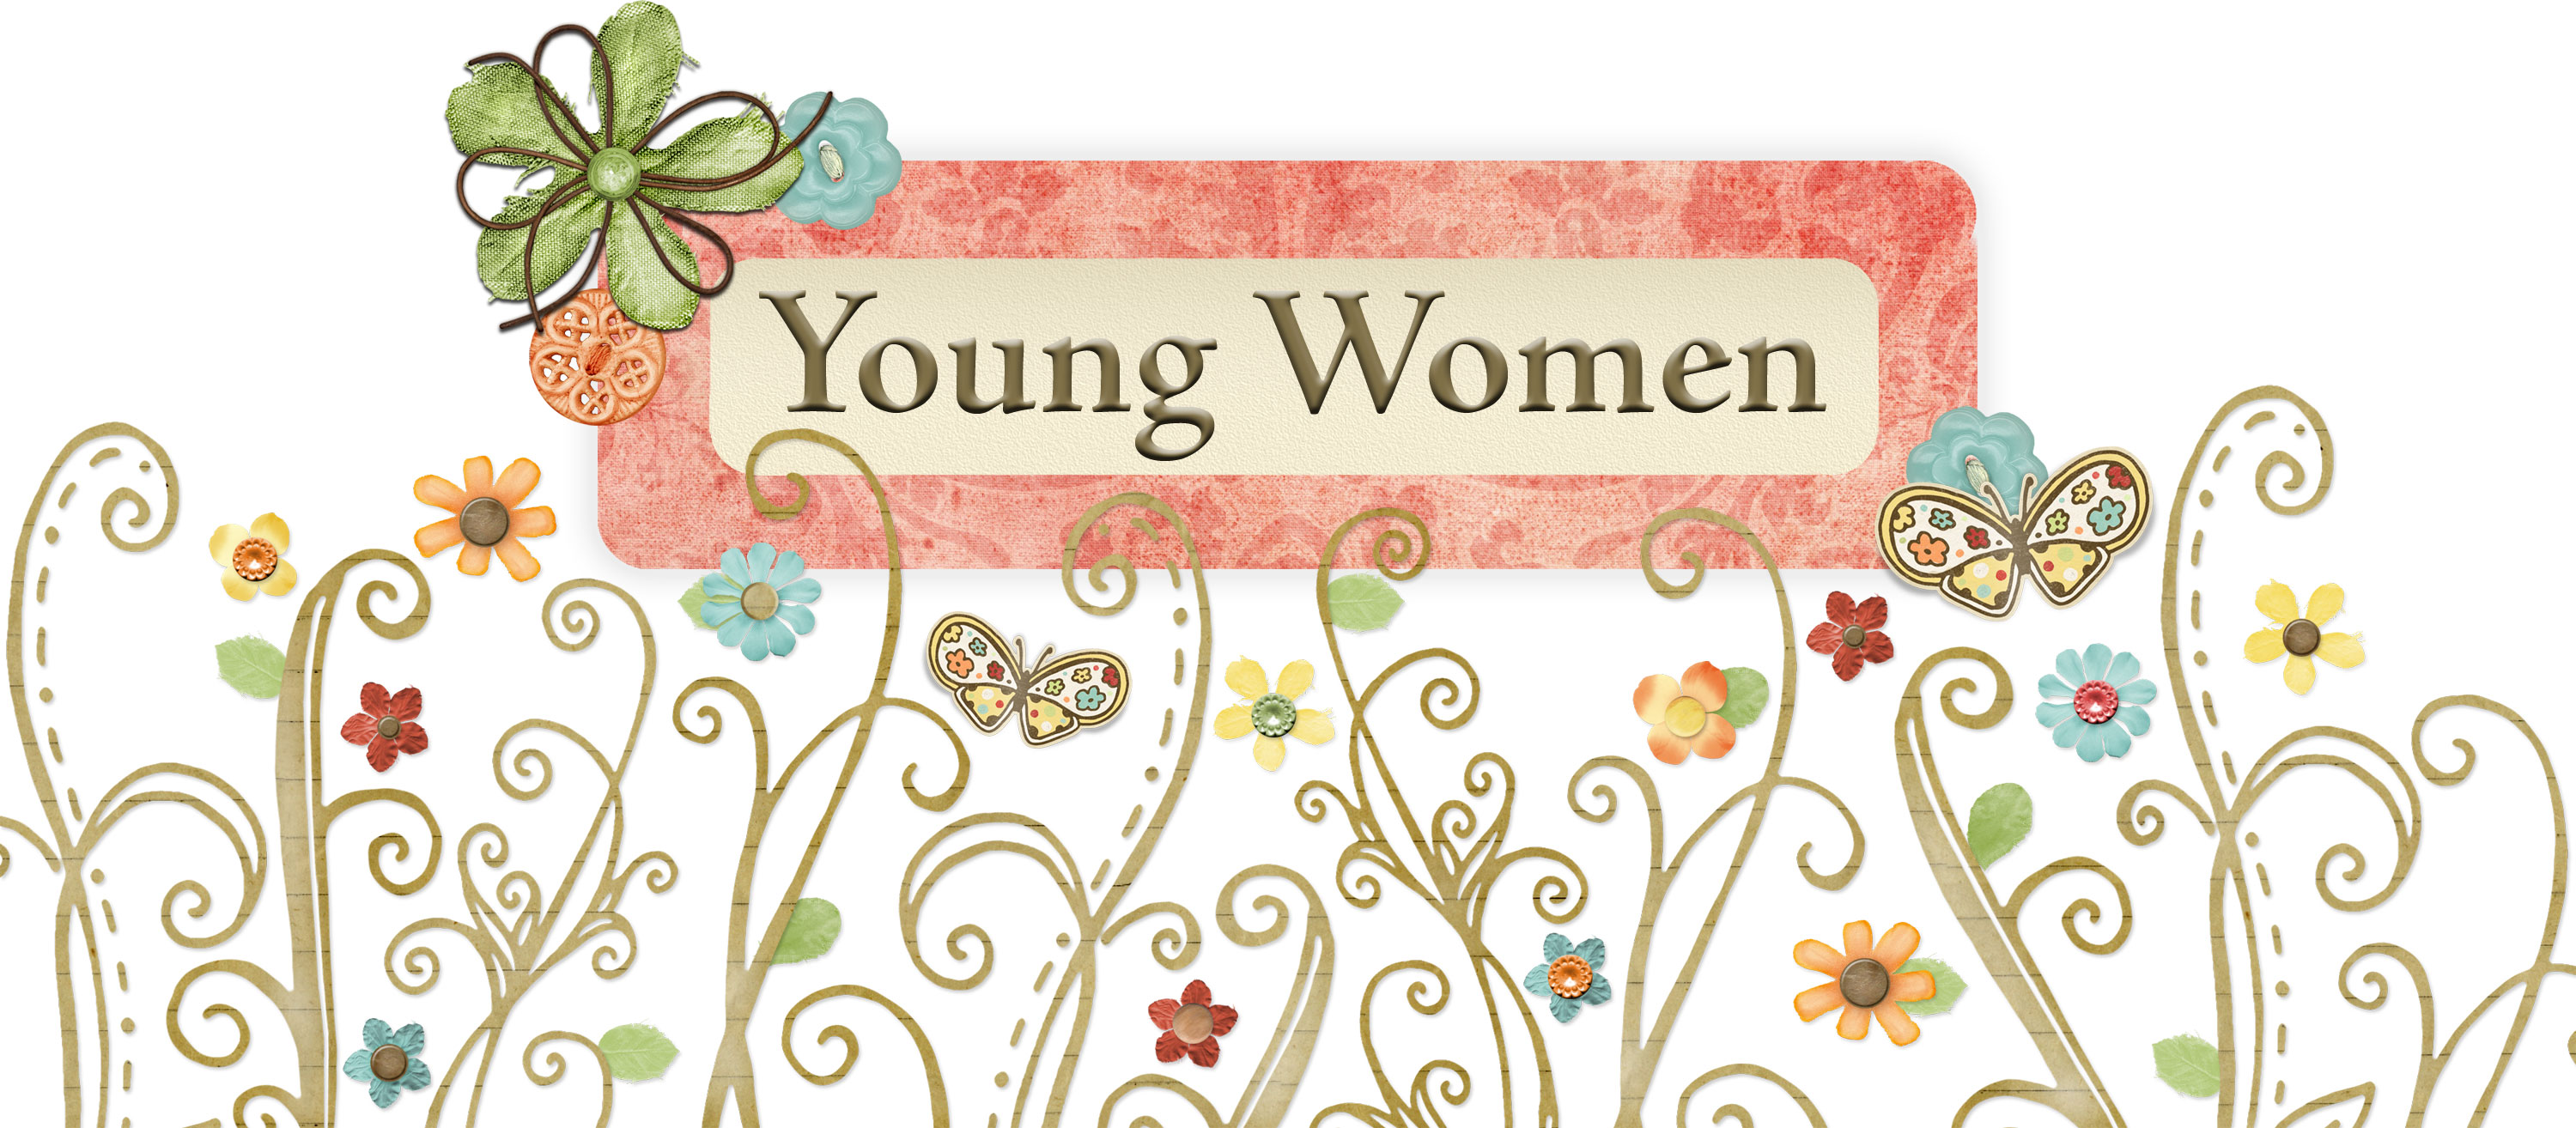 Young Women Class Names And Symbols Young Women Theme